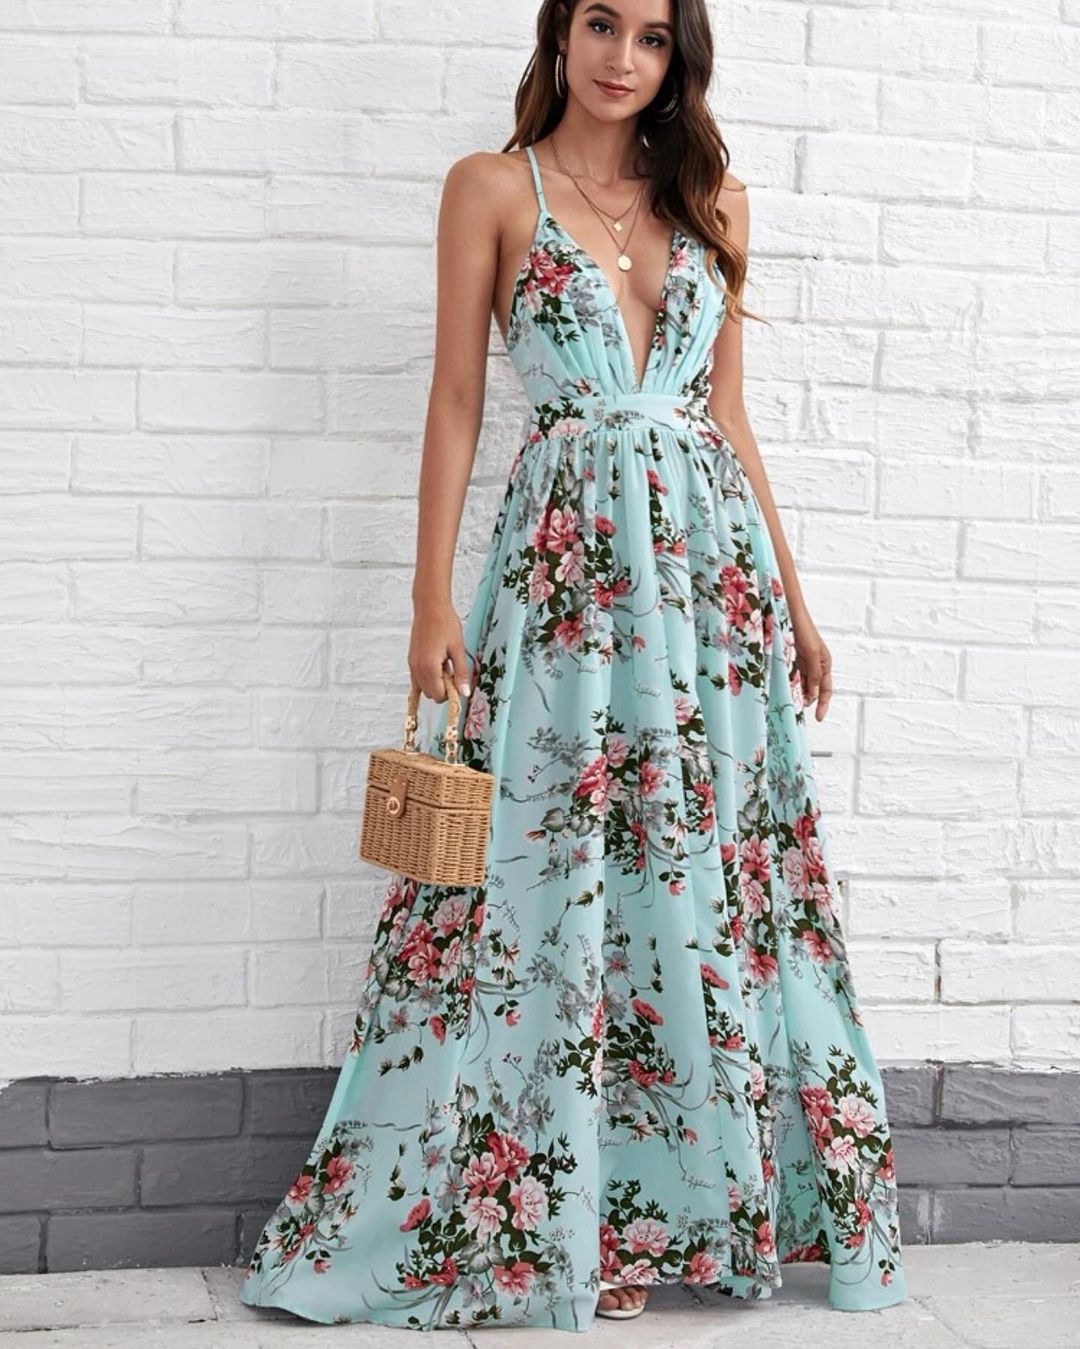 How to Wear Maxi Dresses: Versatile Outfits for Every Occasion - Her ...